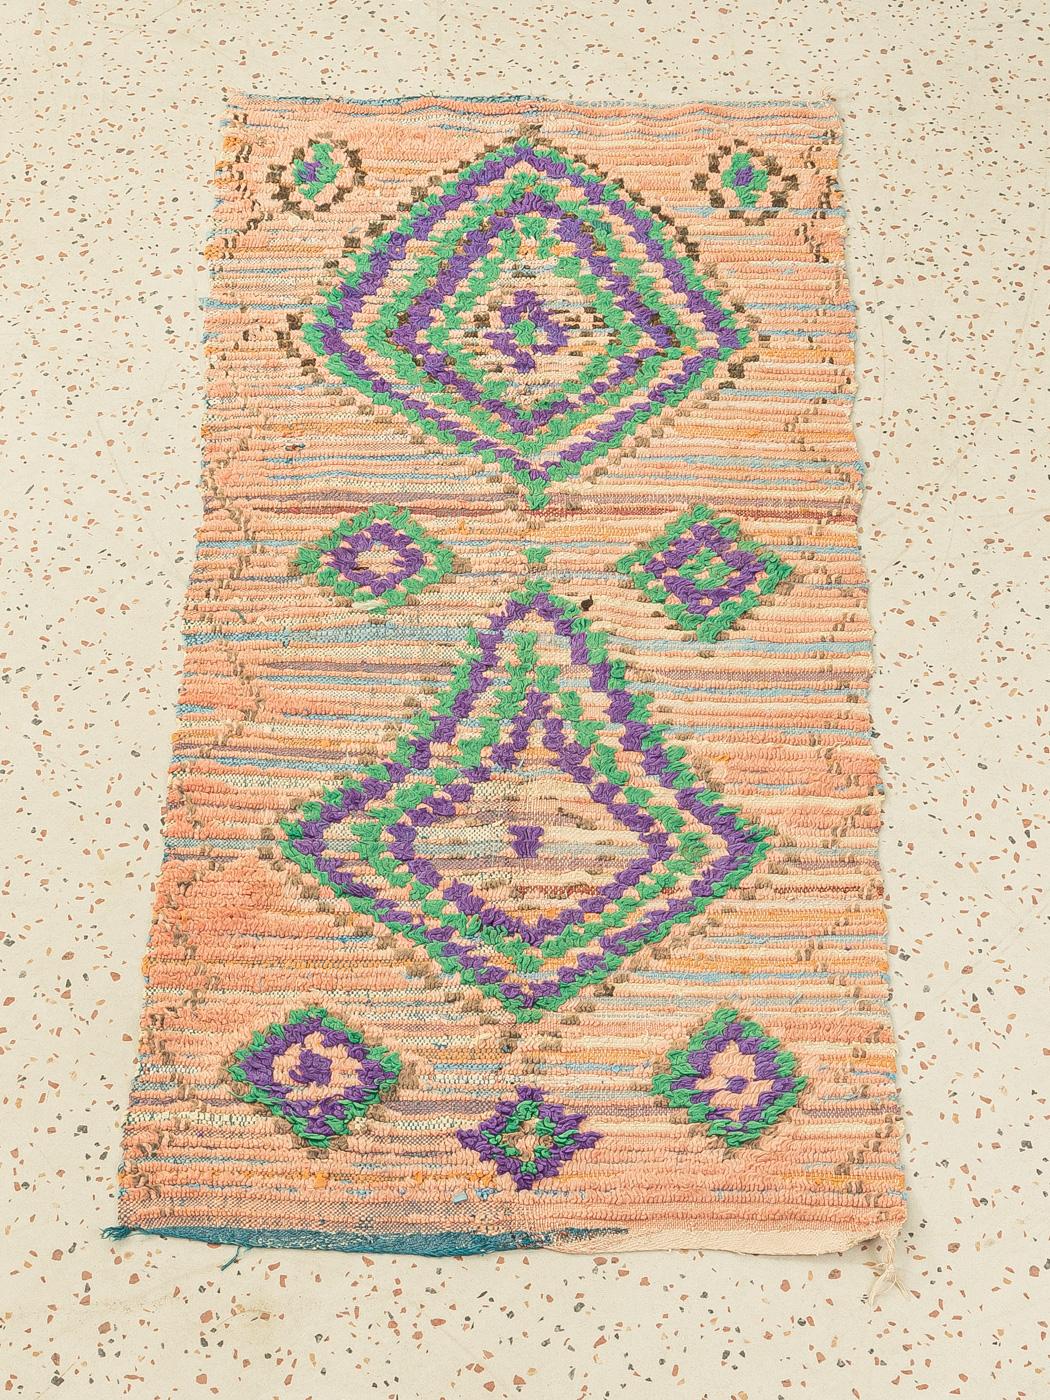 Hand-Woven Vintage Boujad Berber Rug Moroccan Middle Atlas Mountains Orange Green Purple For Sale